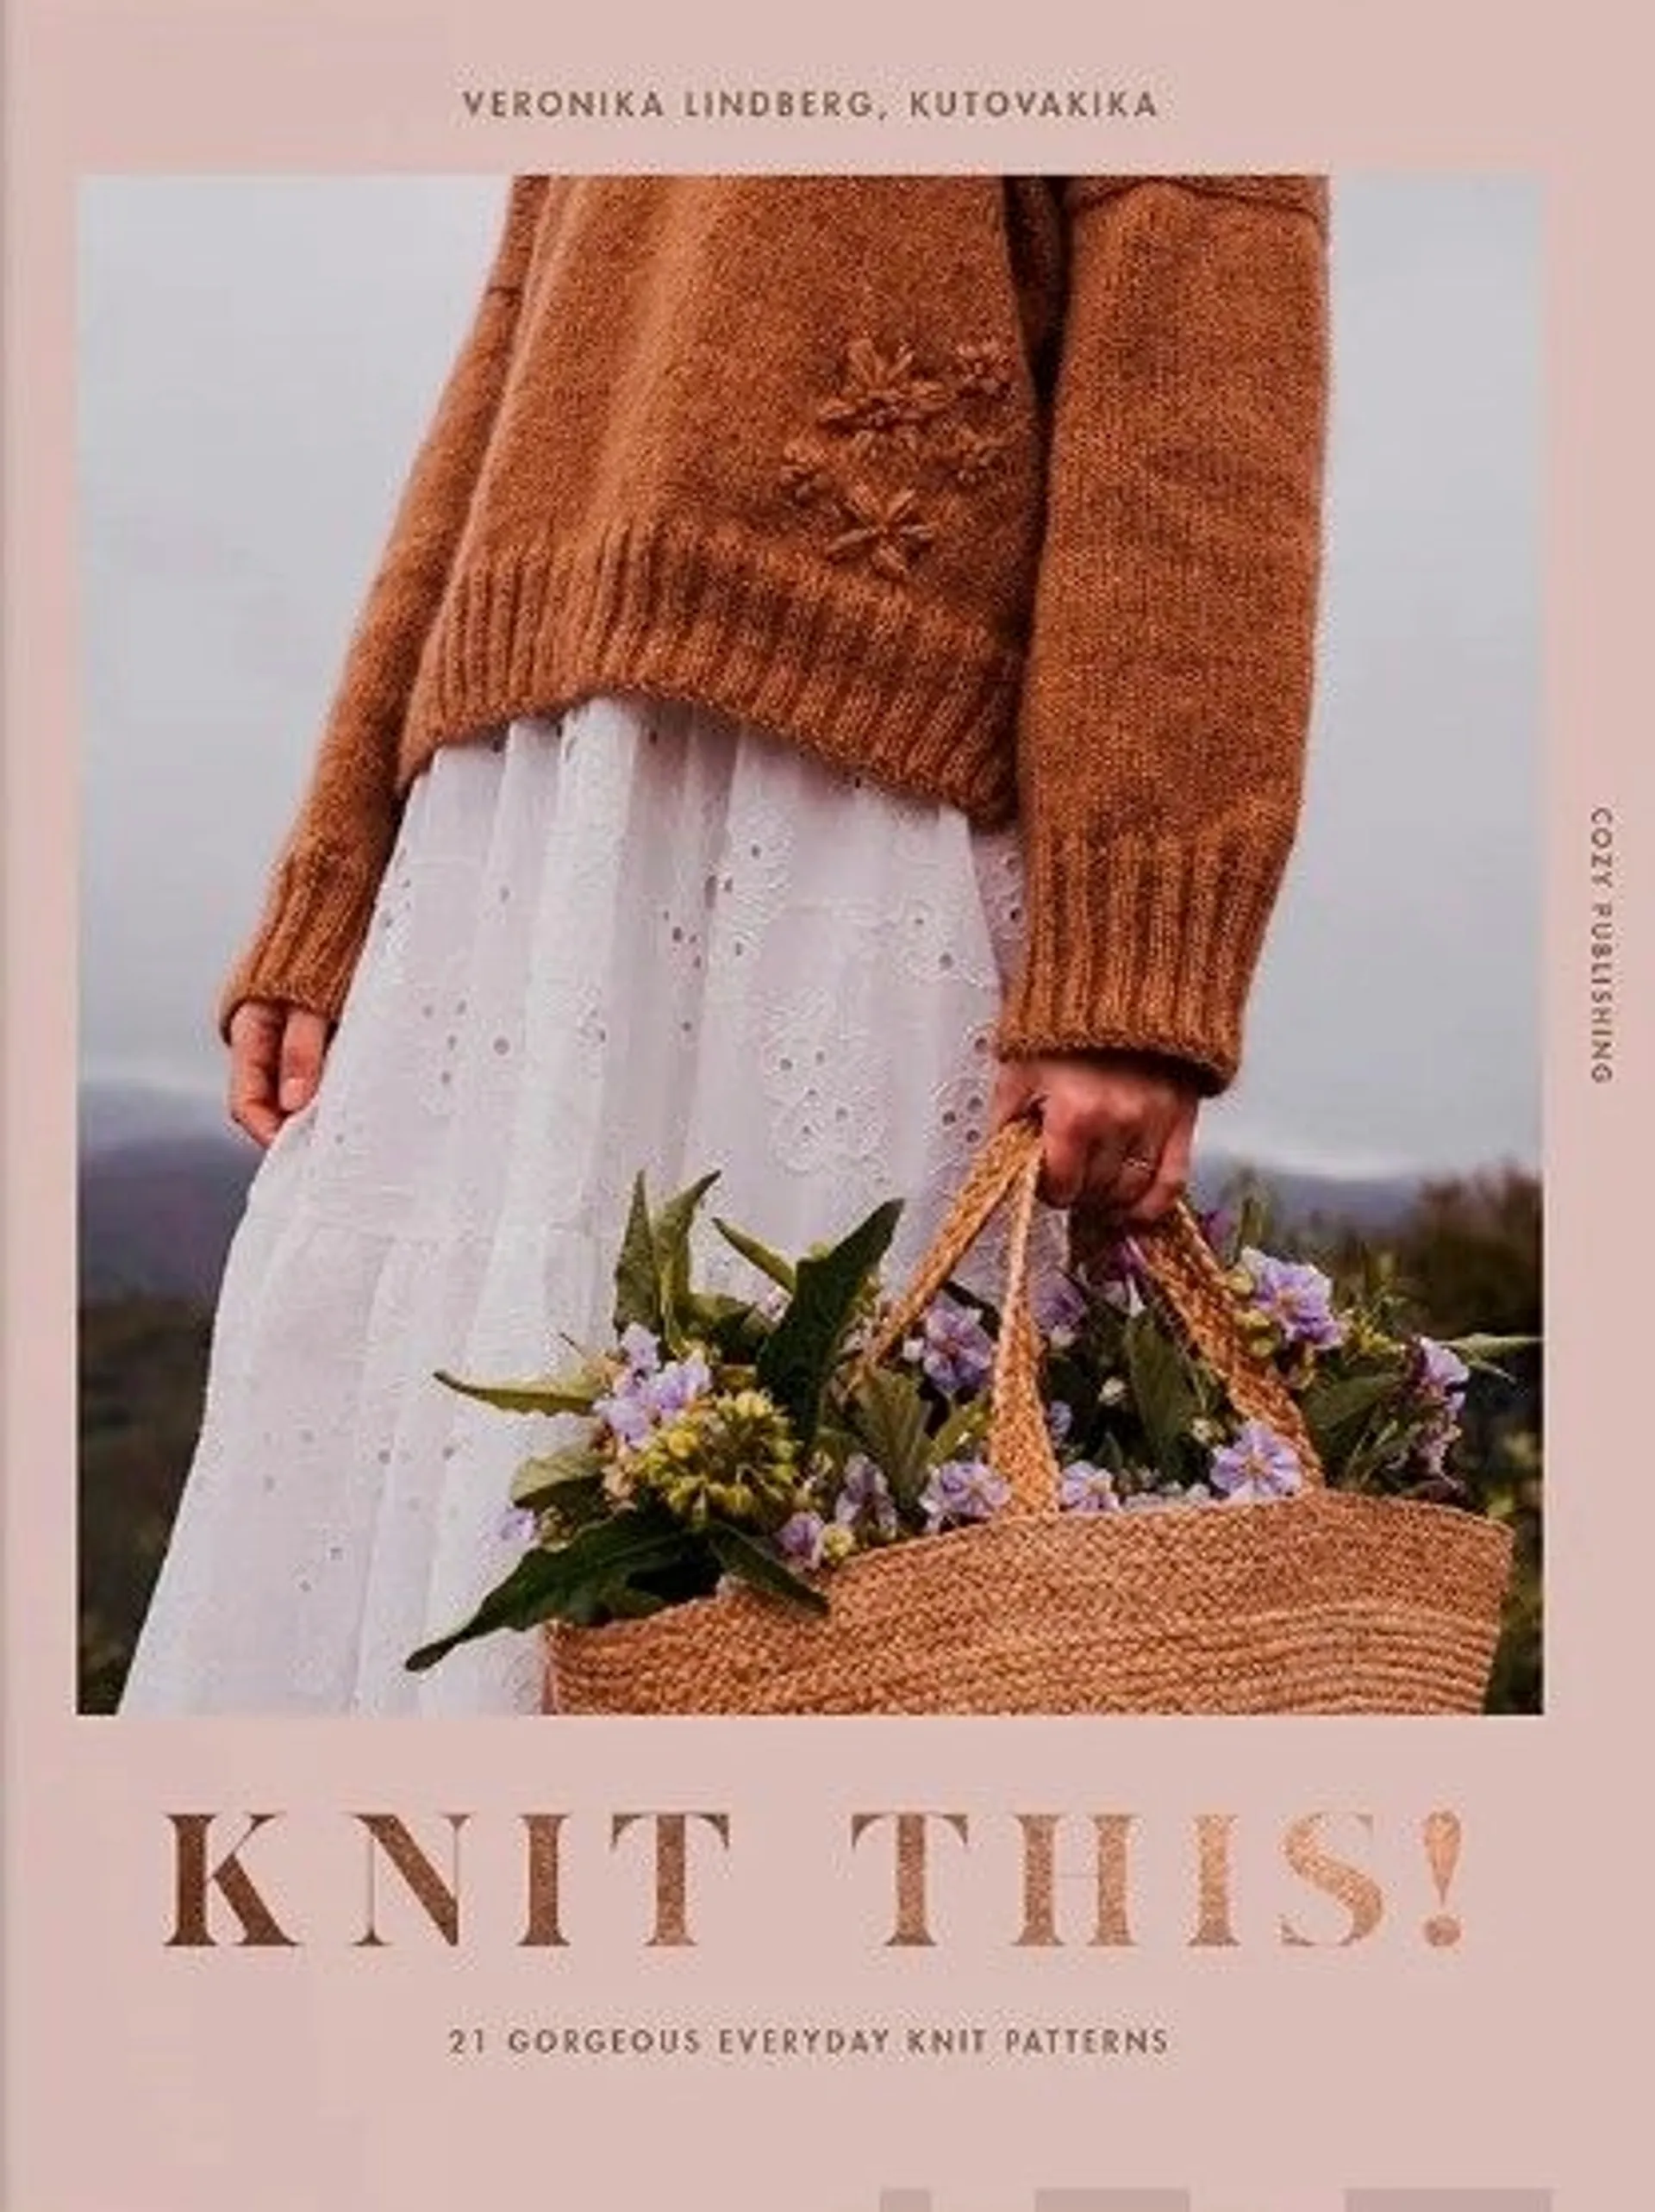 Lindberg, Knit this! - 21 gorgeous everyday knit patterns